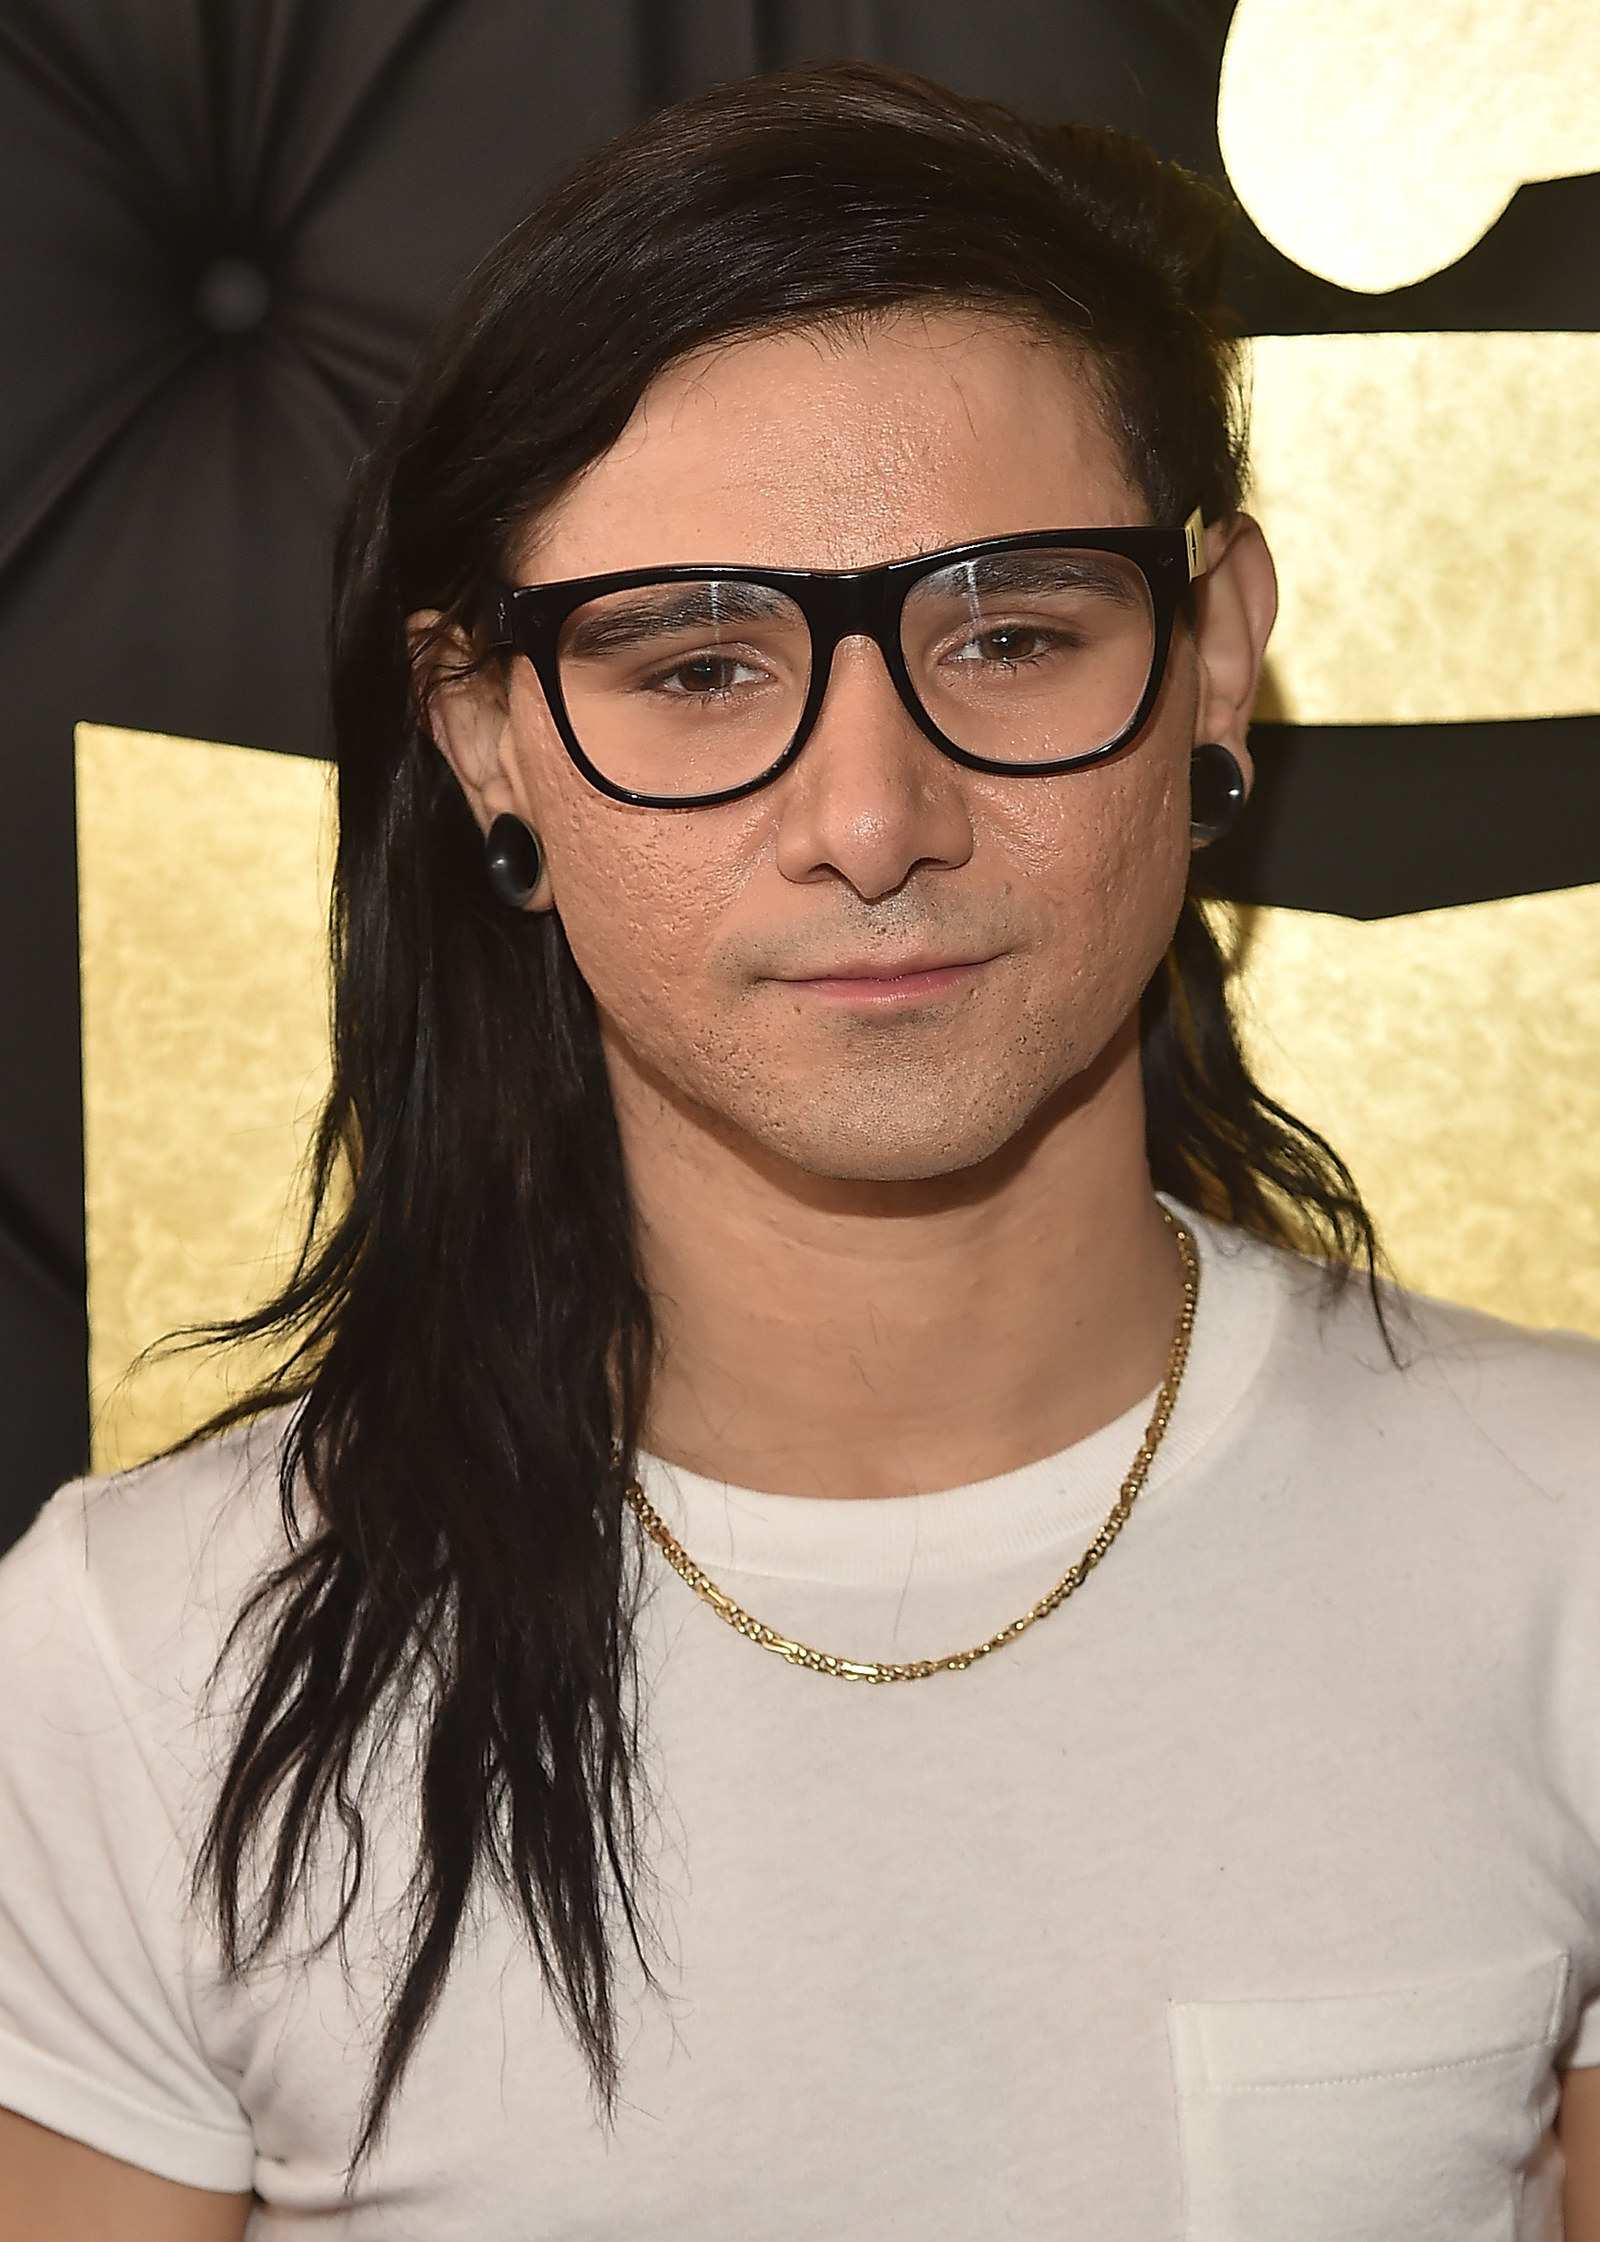 Skrillex looks like Corey and I can't be the only one who thinks so. 